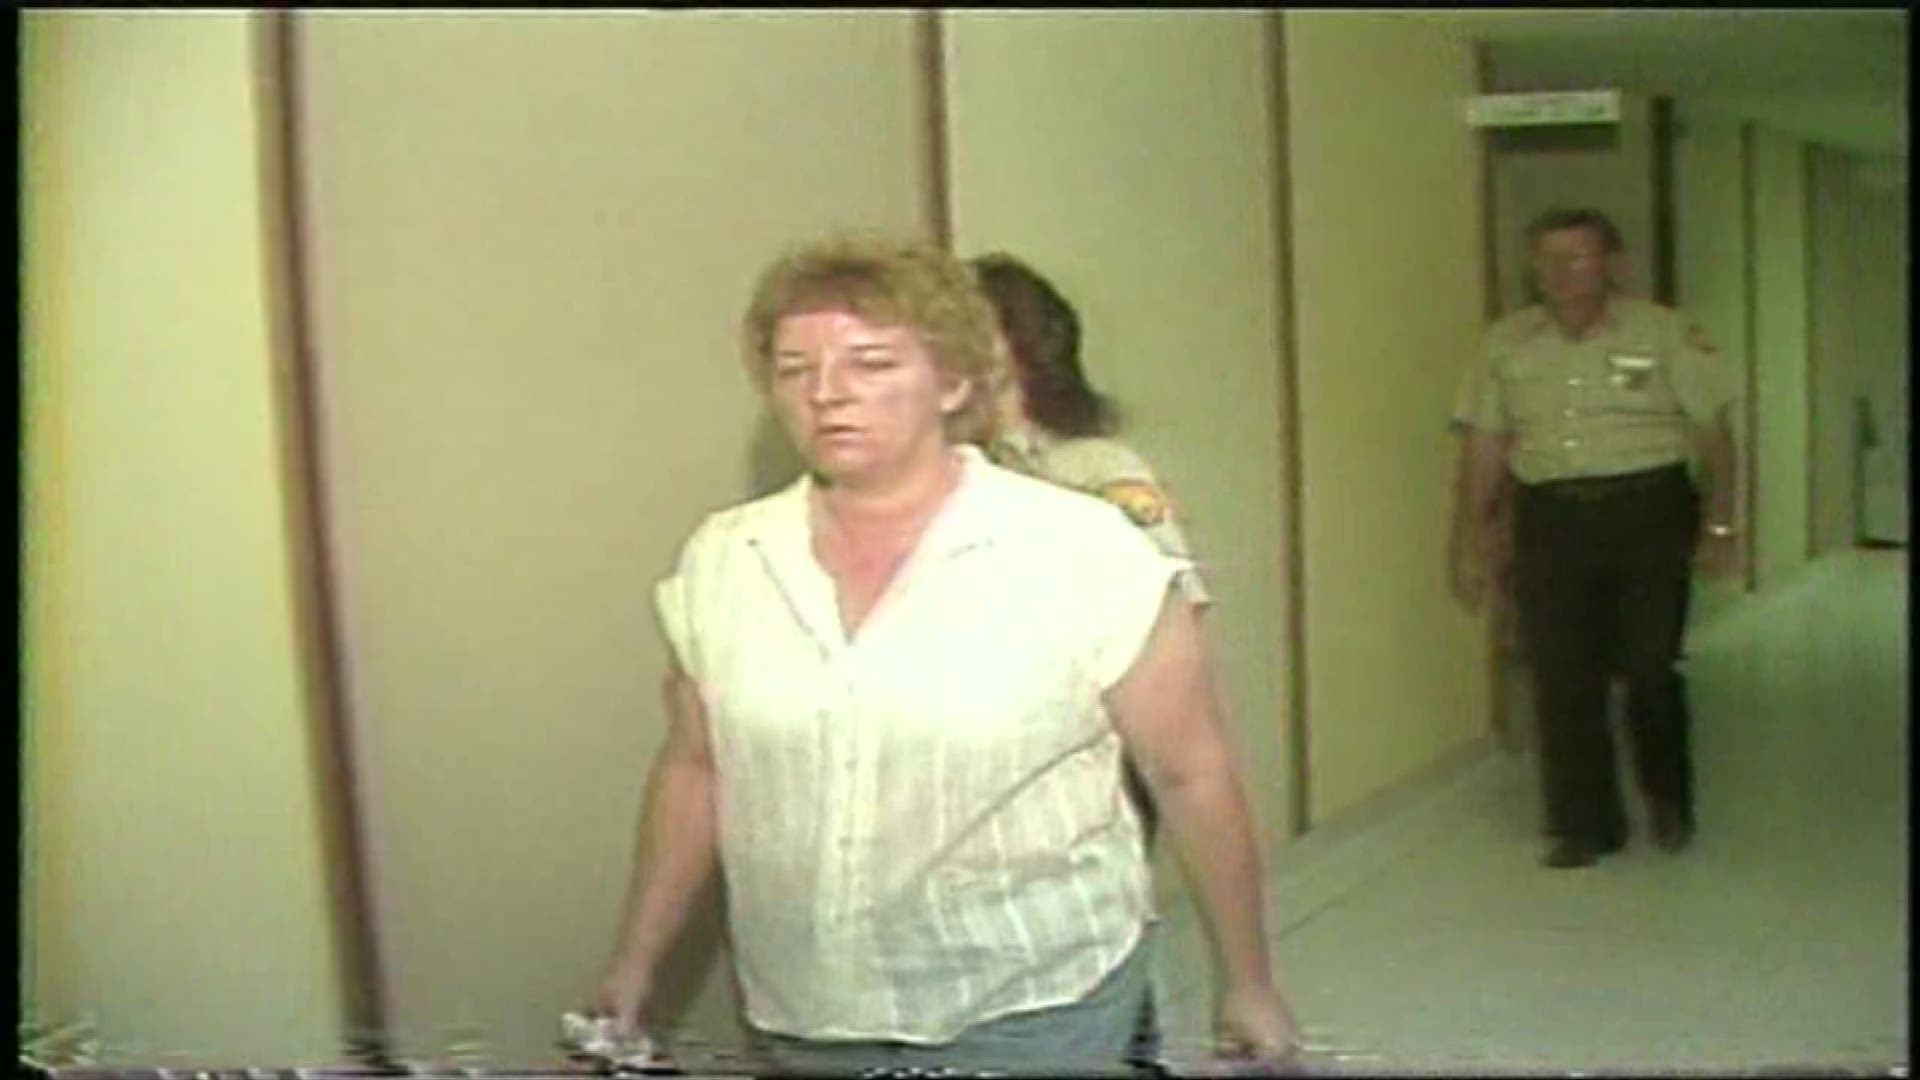 Genene Jones was set to be released from prison, but recent indictments mean she will be extradited back to Bexar County to face trial after her release in 2018.